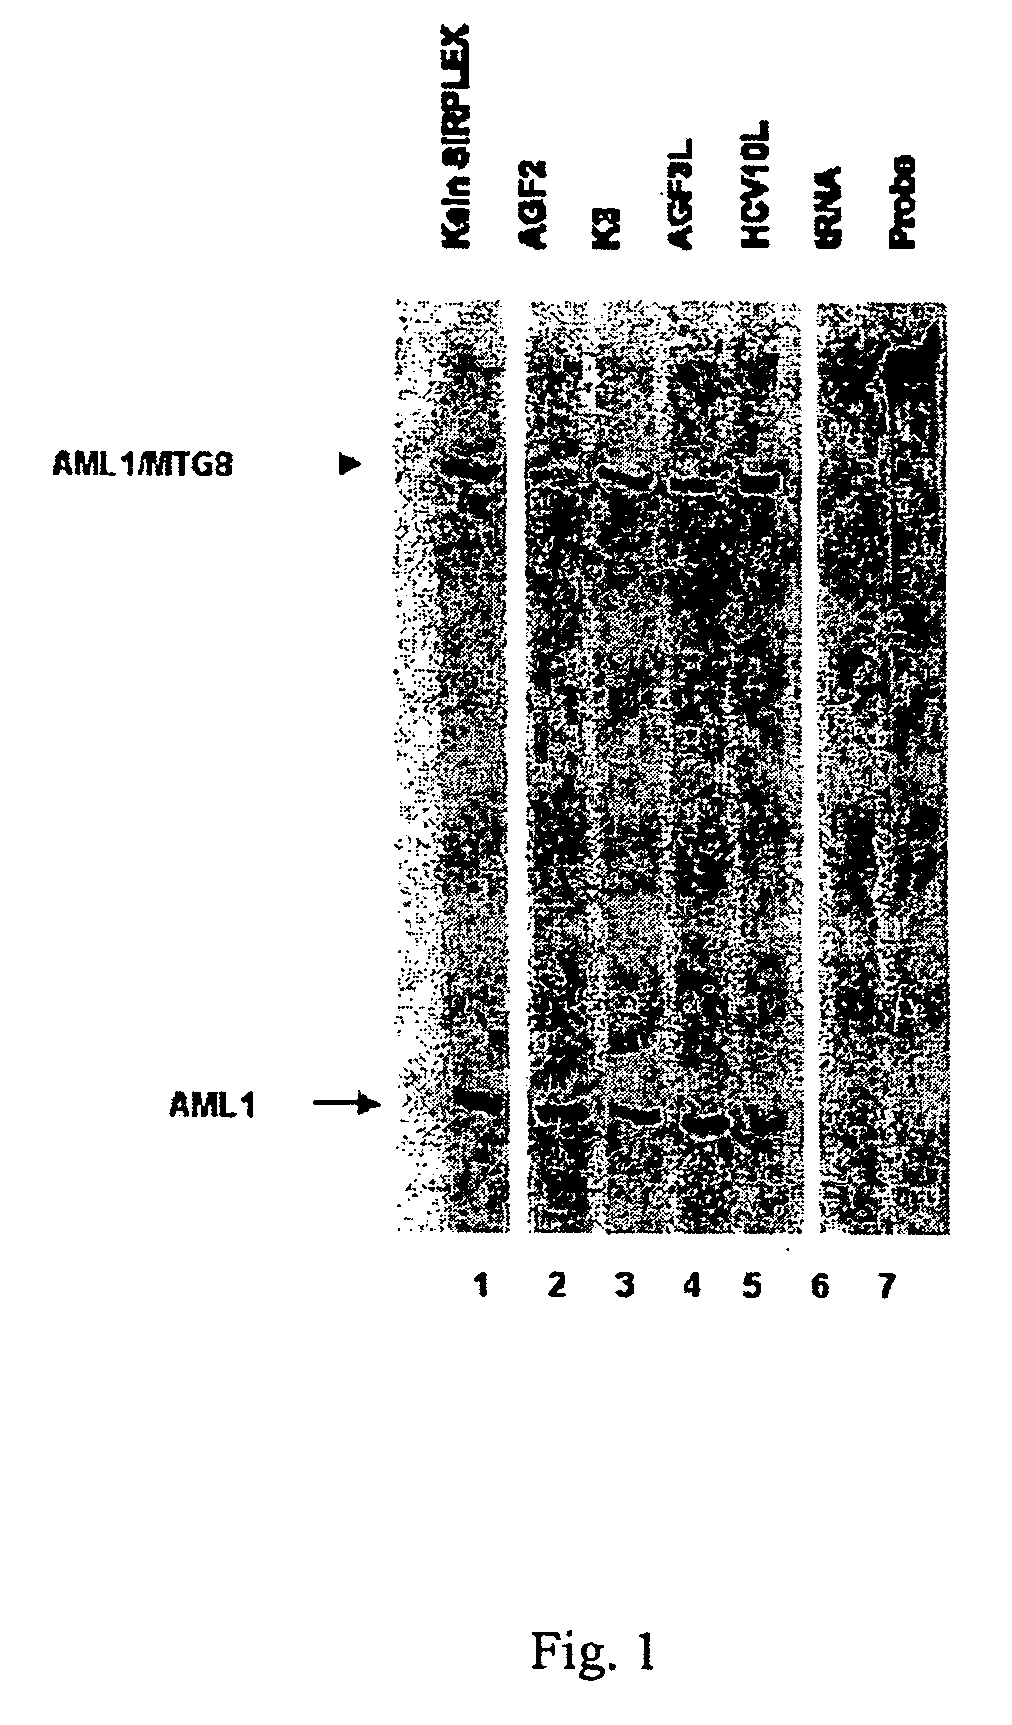 Double-stranded RNA (dsRNA) and method of use for inhibiting expression of a fusion gene